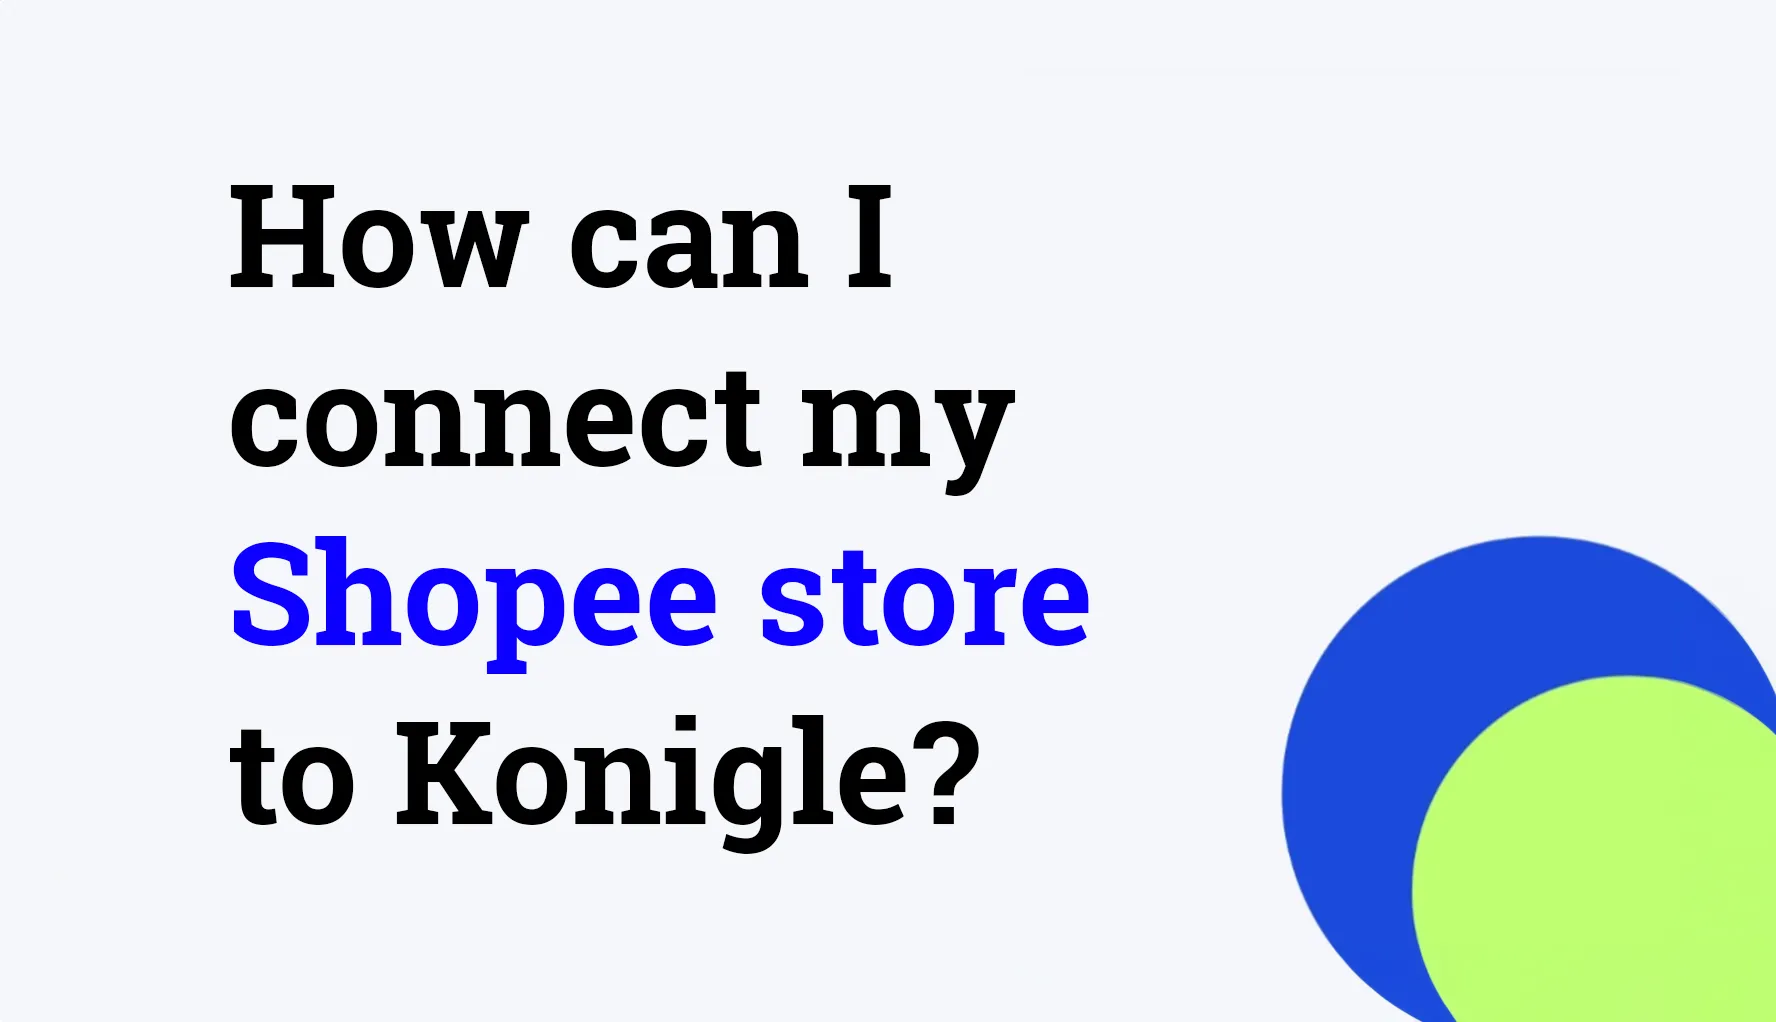 How can I connect my Shopee store to Konigle?